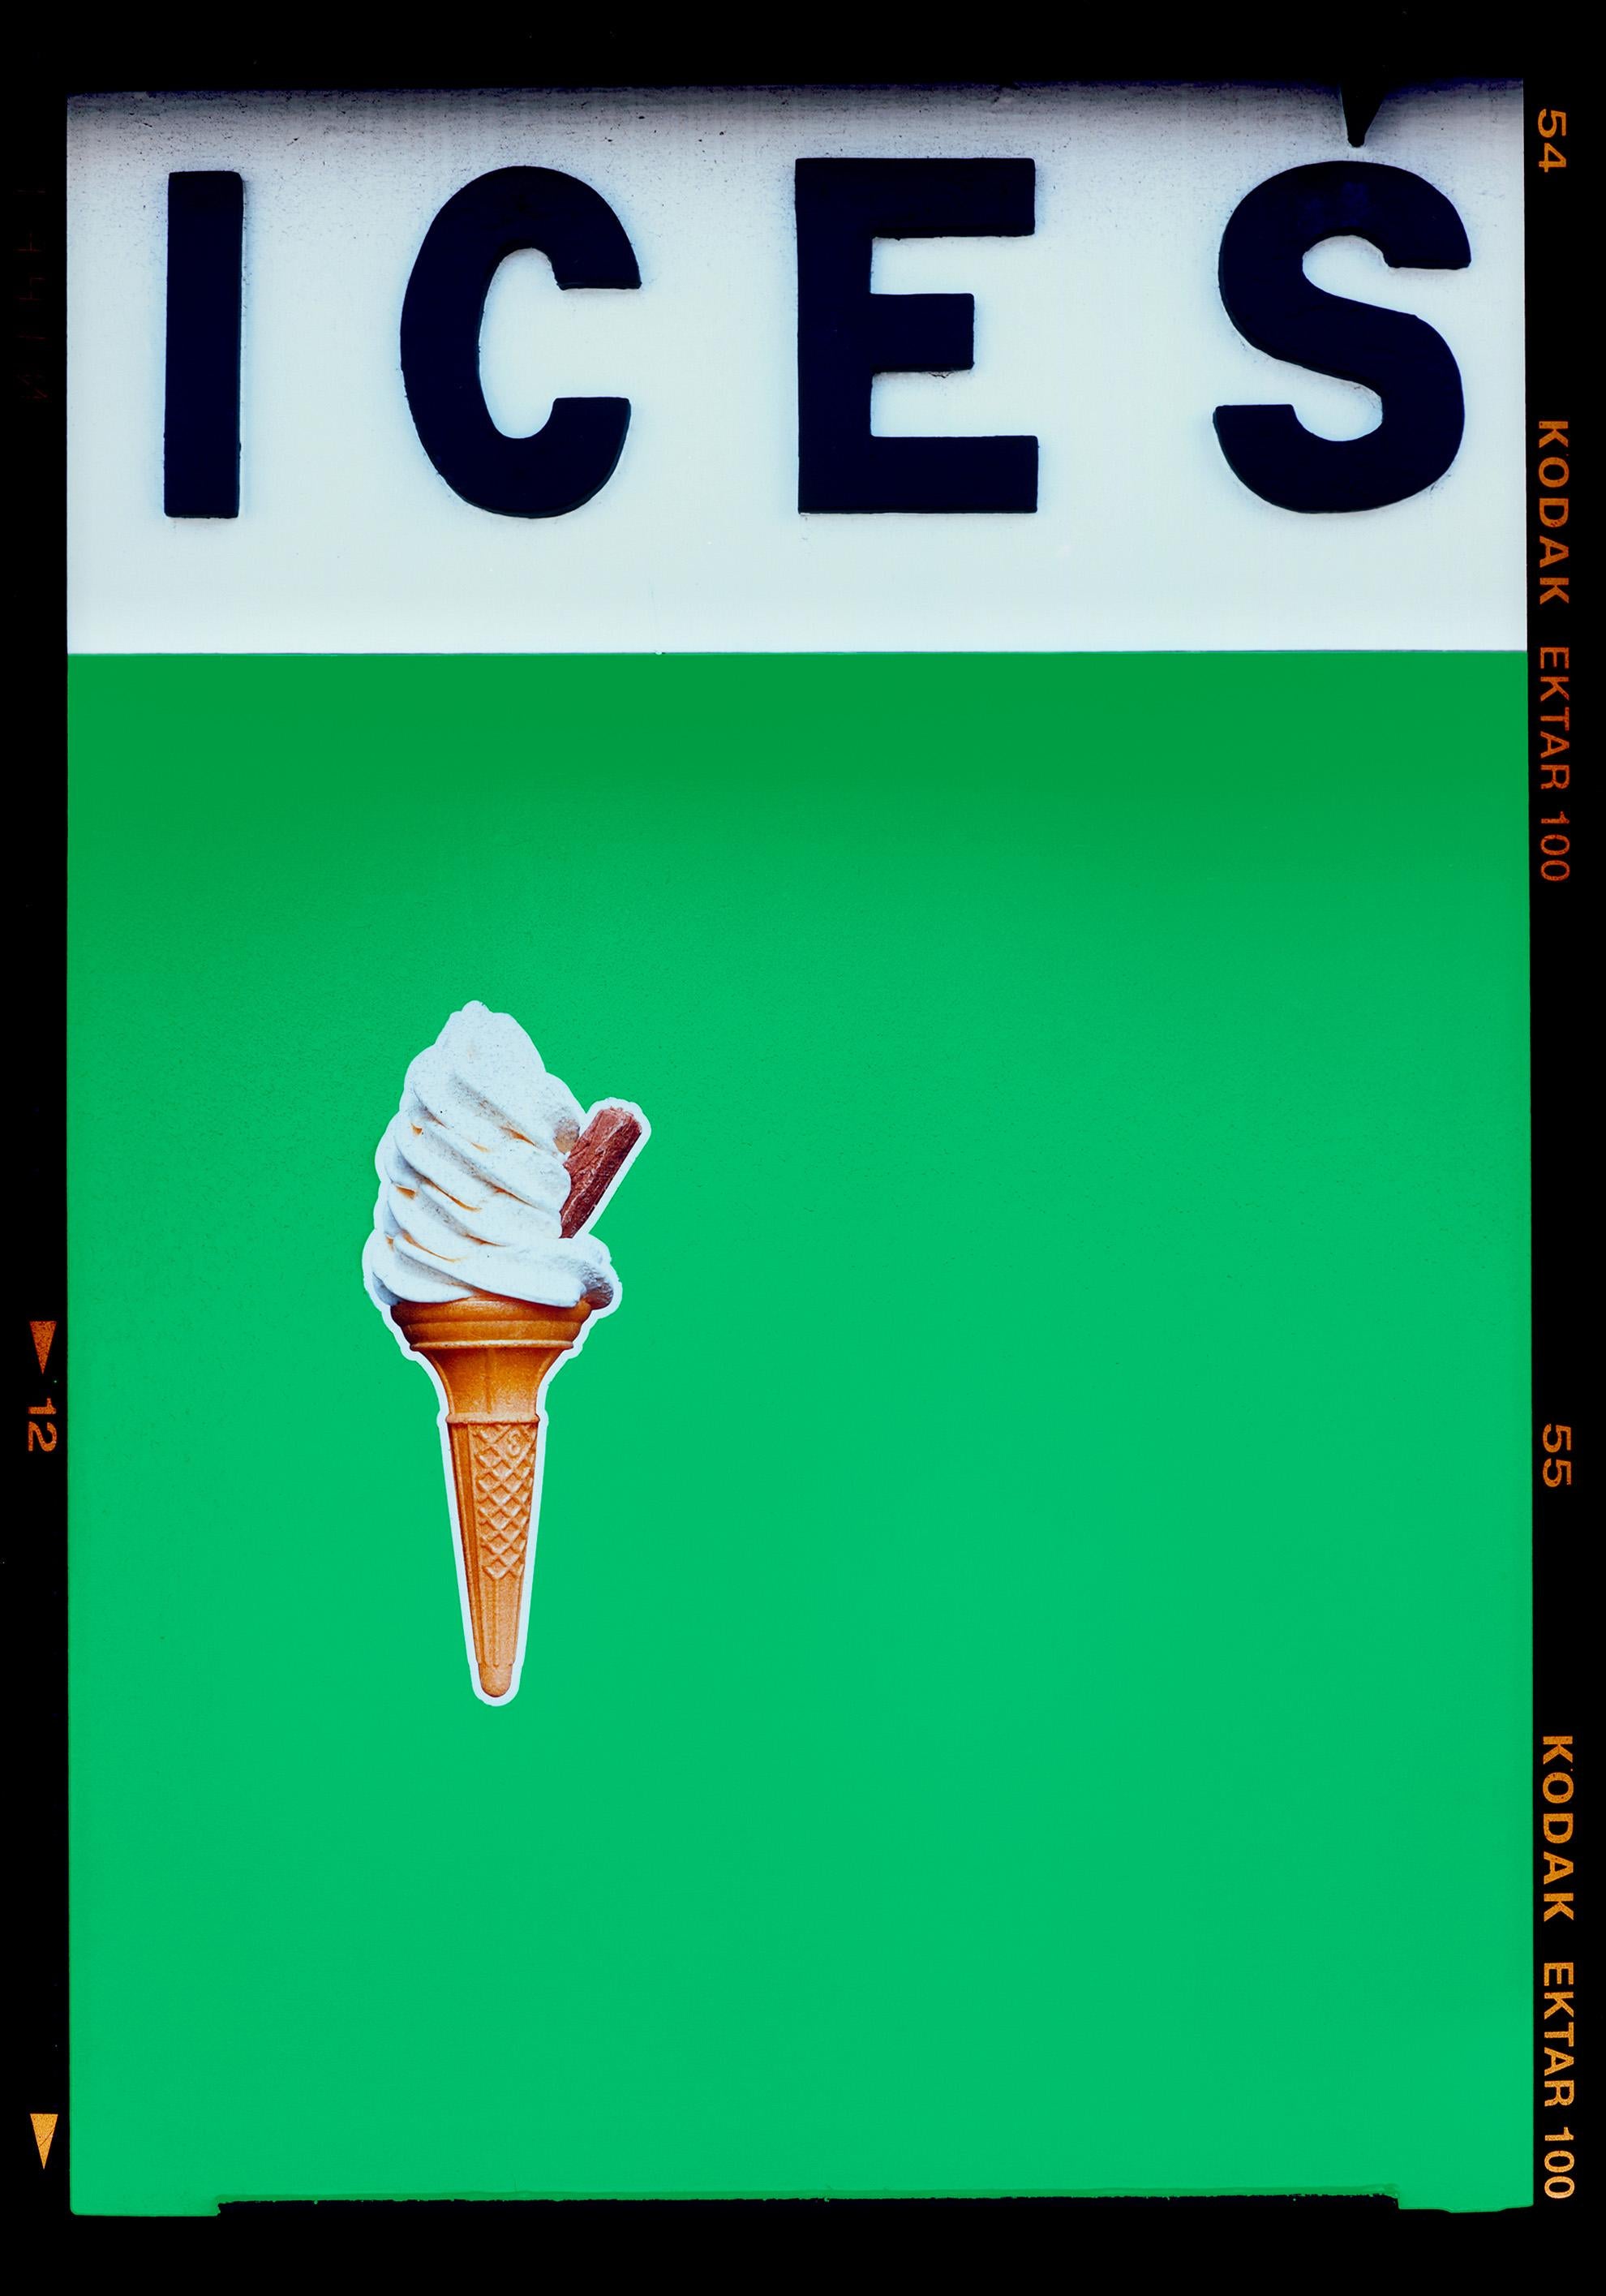 Richard Heeps Color Photograph - ICES (Green), Bexhill-on-Sea - British seaside color photography